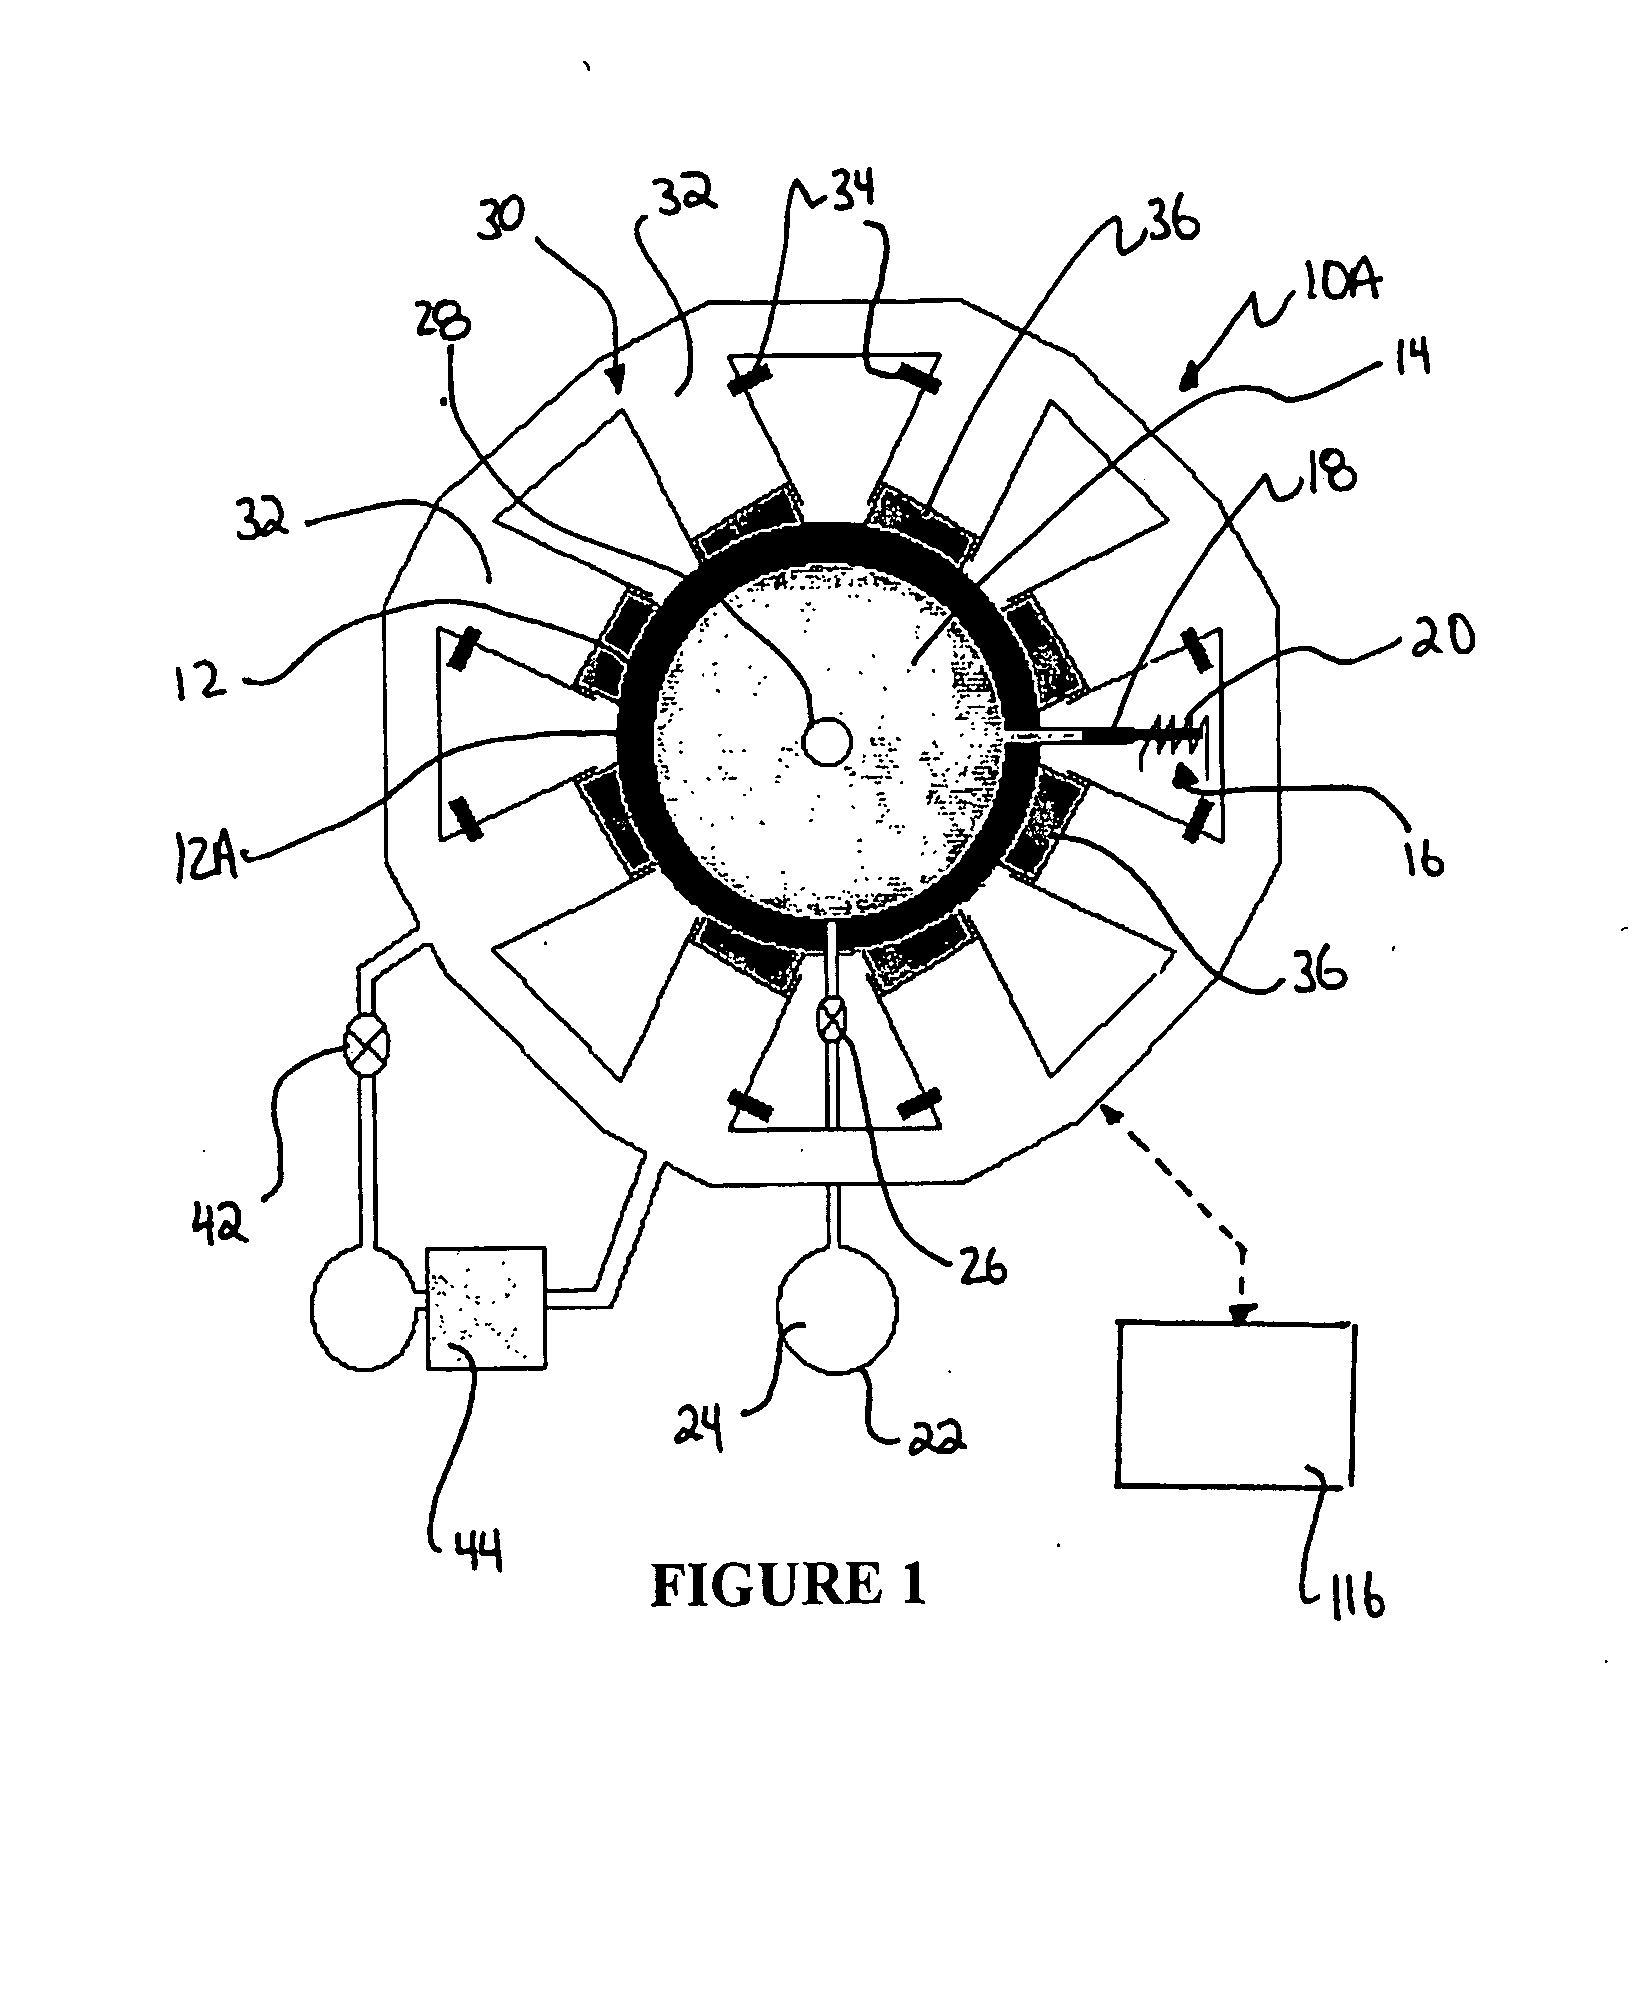 Apparatus and method for fusion reactor